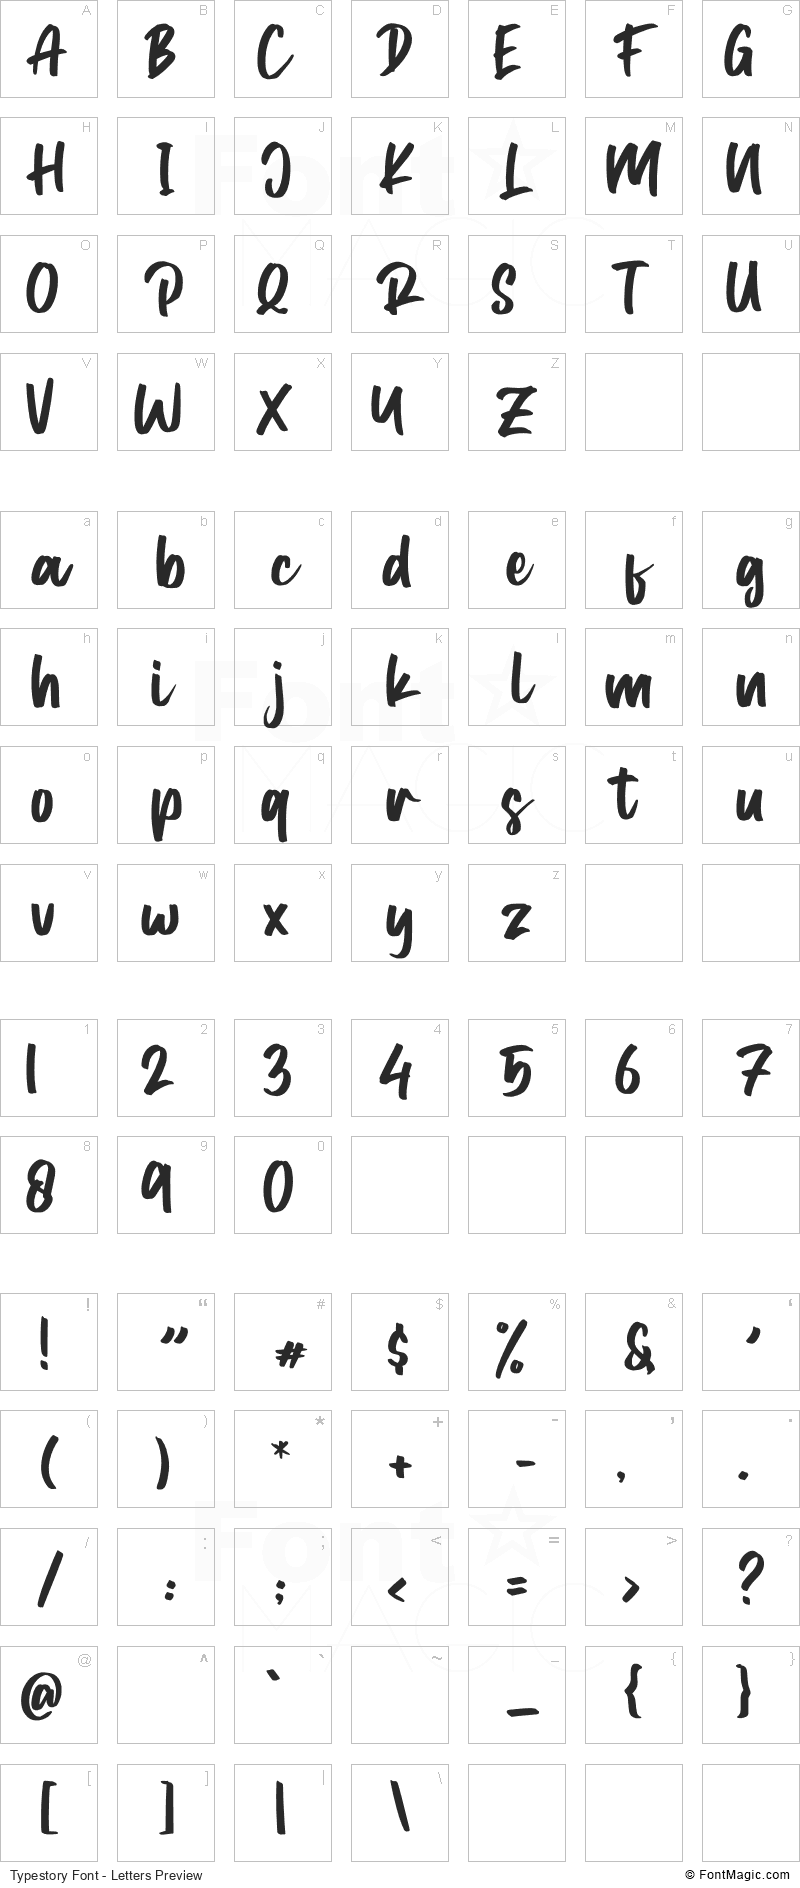 Typestory Font - All Latters Preview Chart